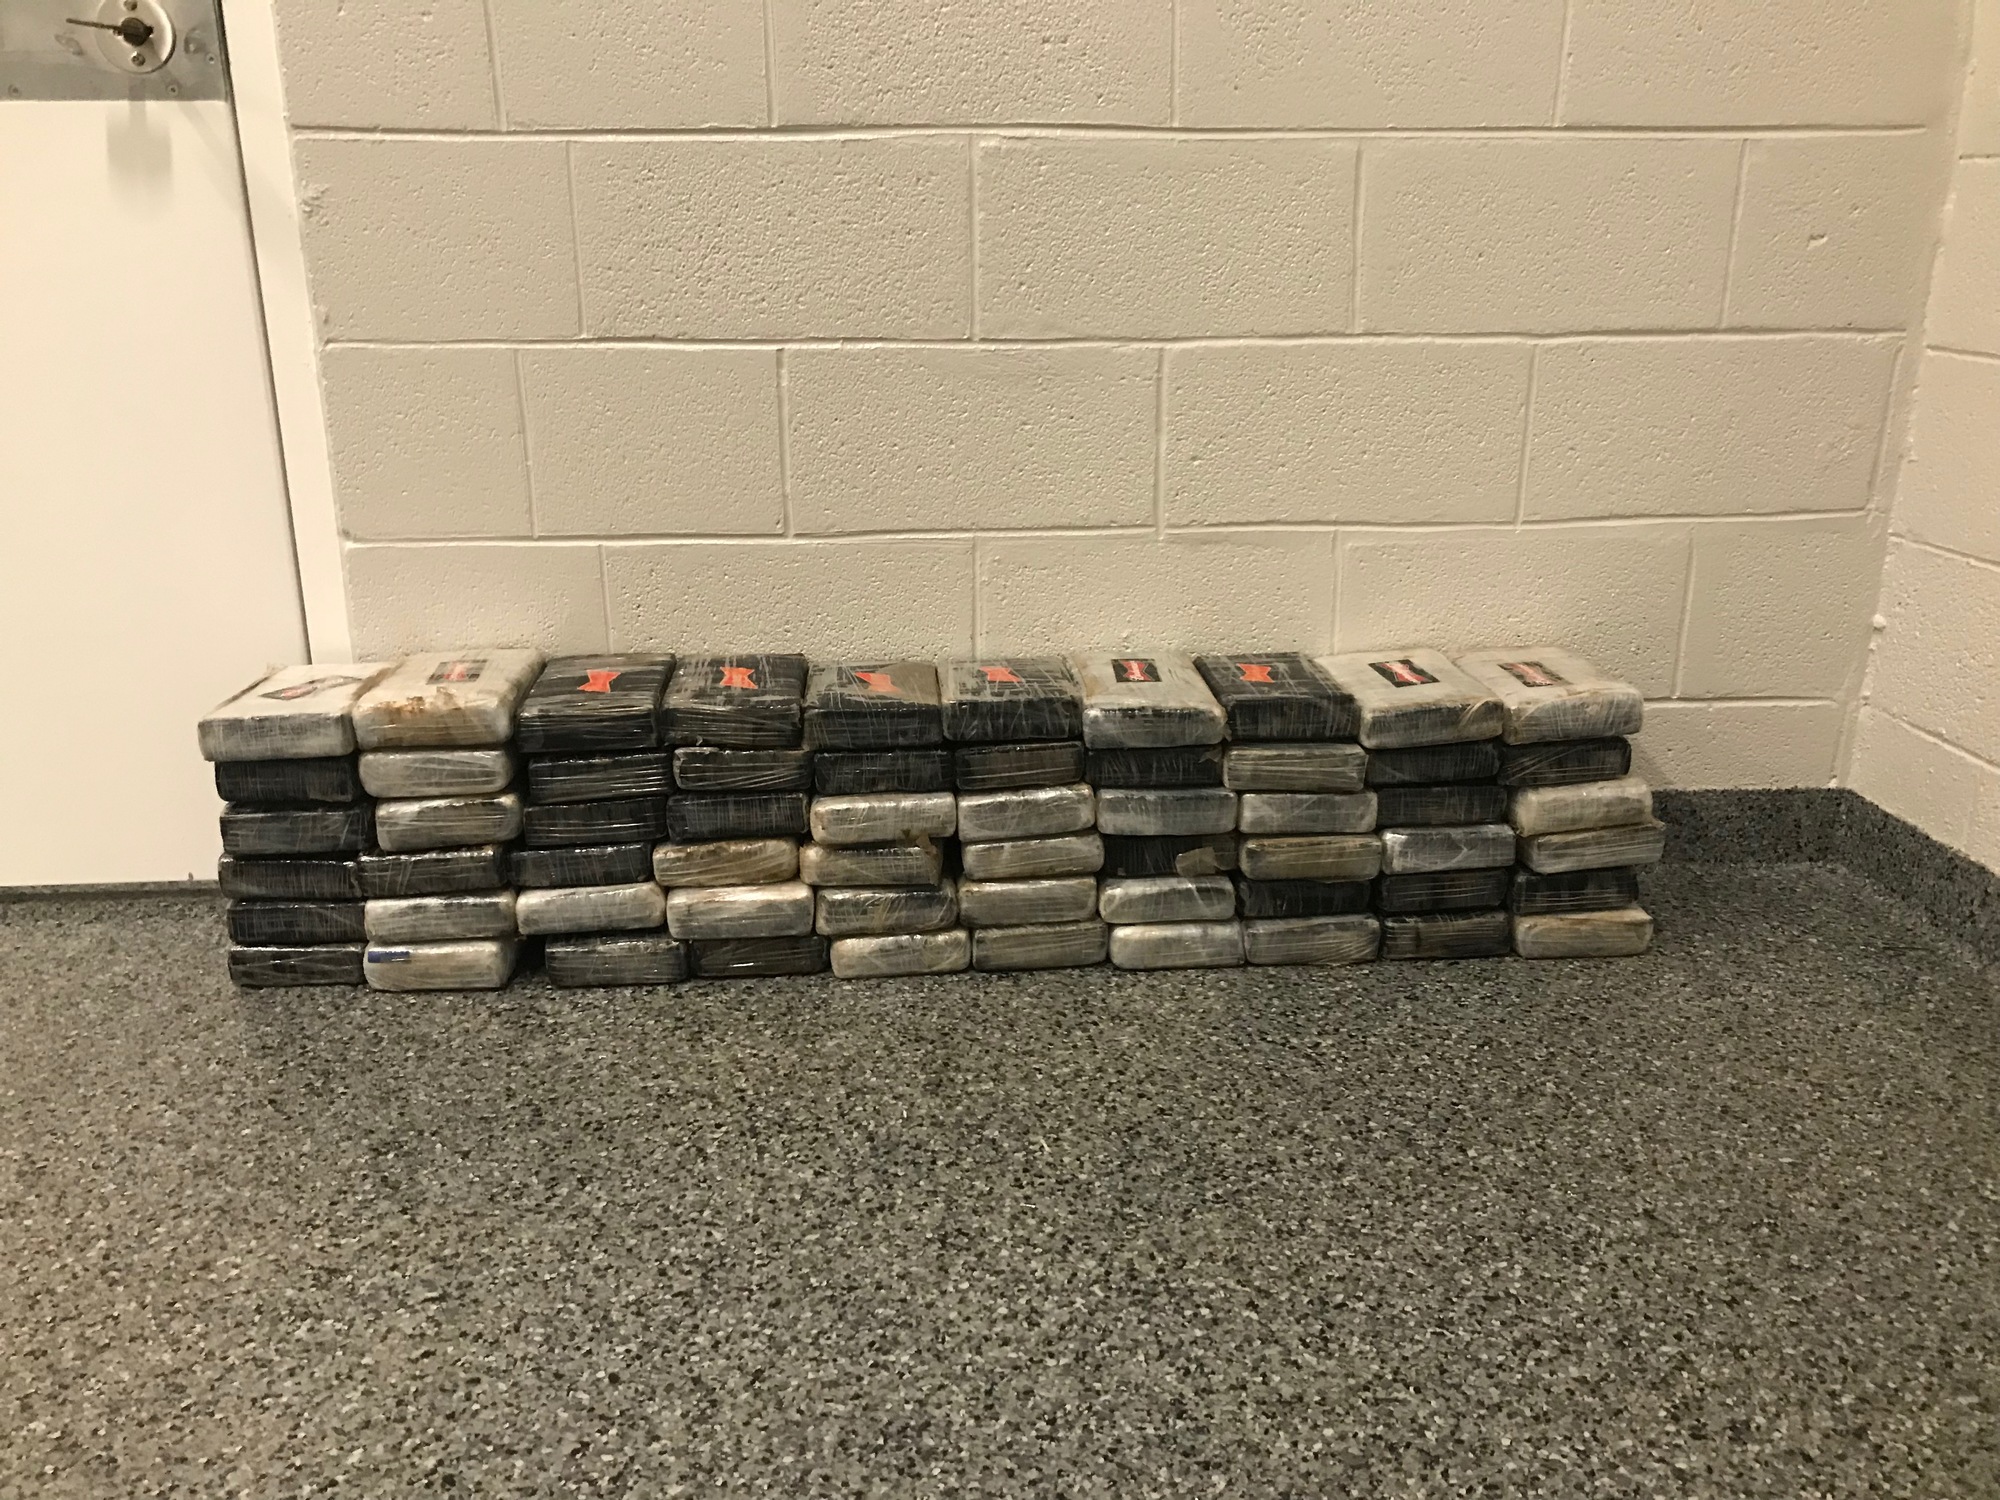 Coast Guard interdicts 2 suspected drug smugglers, 128 pounds of cocaine